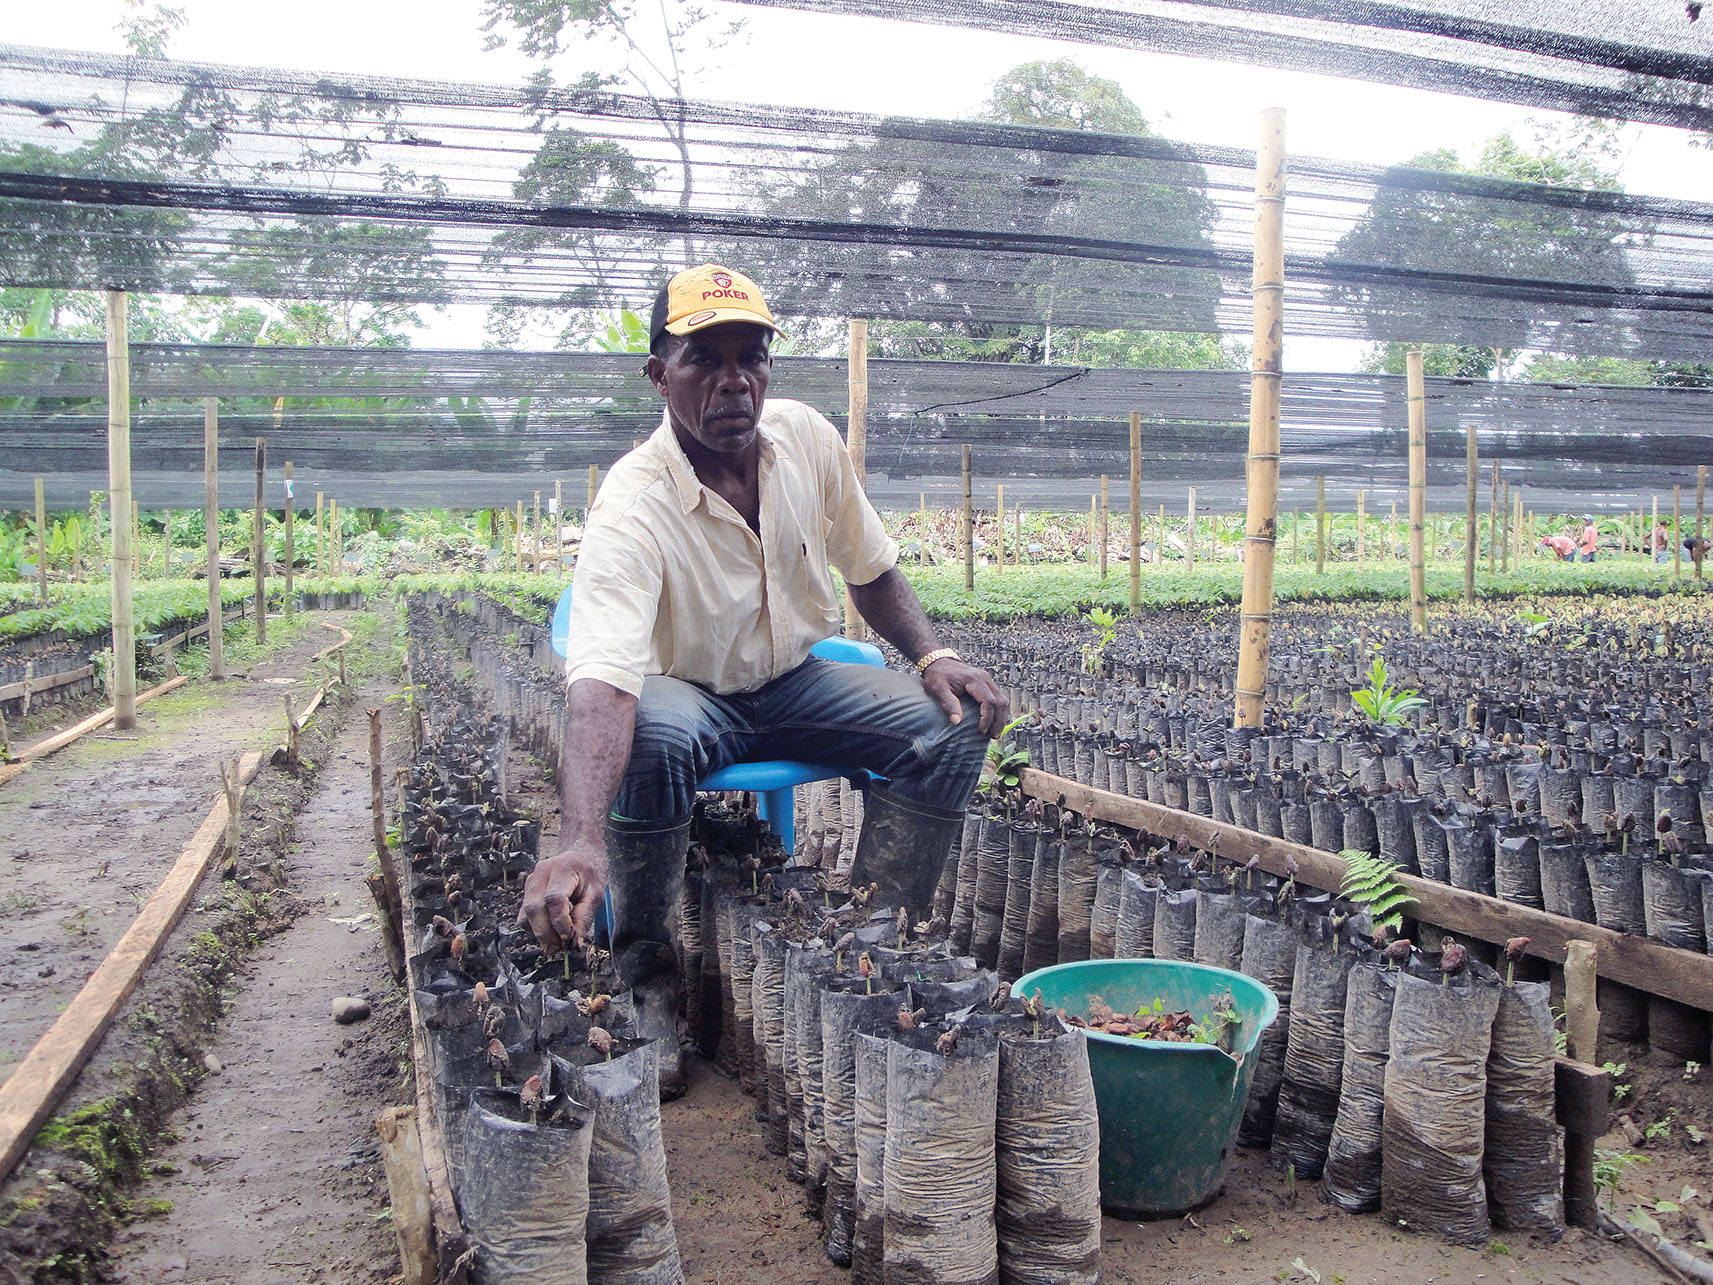 A worker tends cacao seedlings in a field under nets in Las Varas. (Photo by Sarah Krupp.)